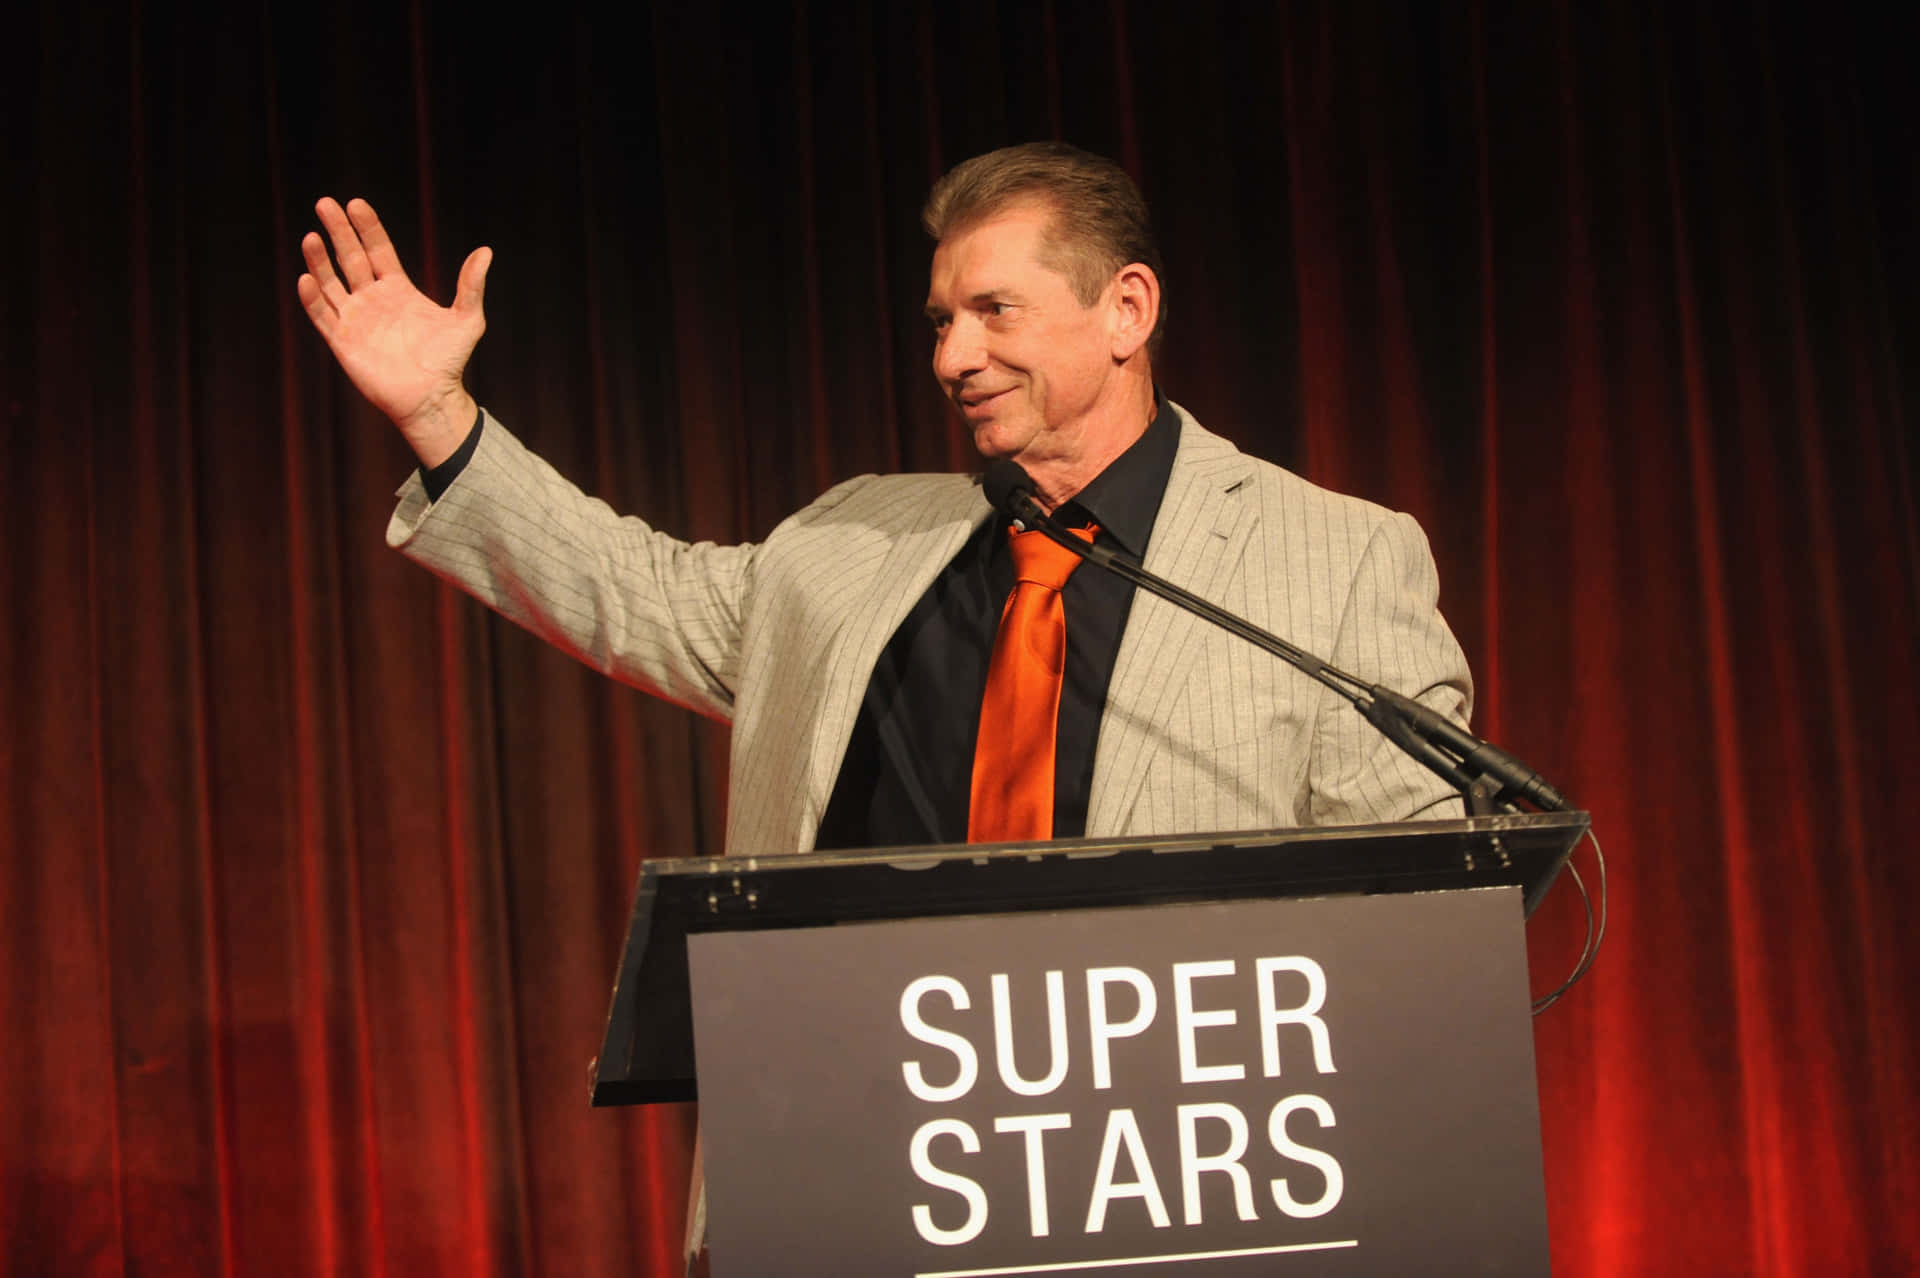 Wwe Vince Mcmahon During The Superstars Event Background